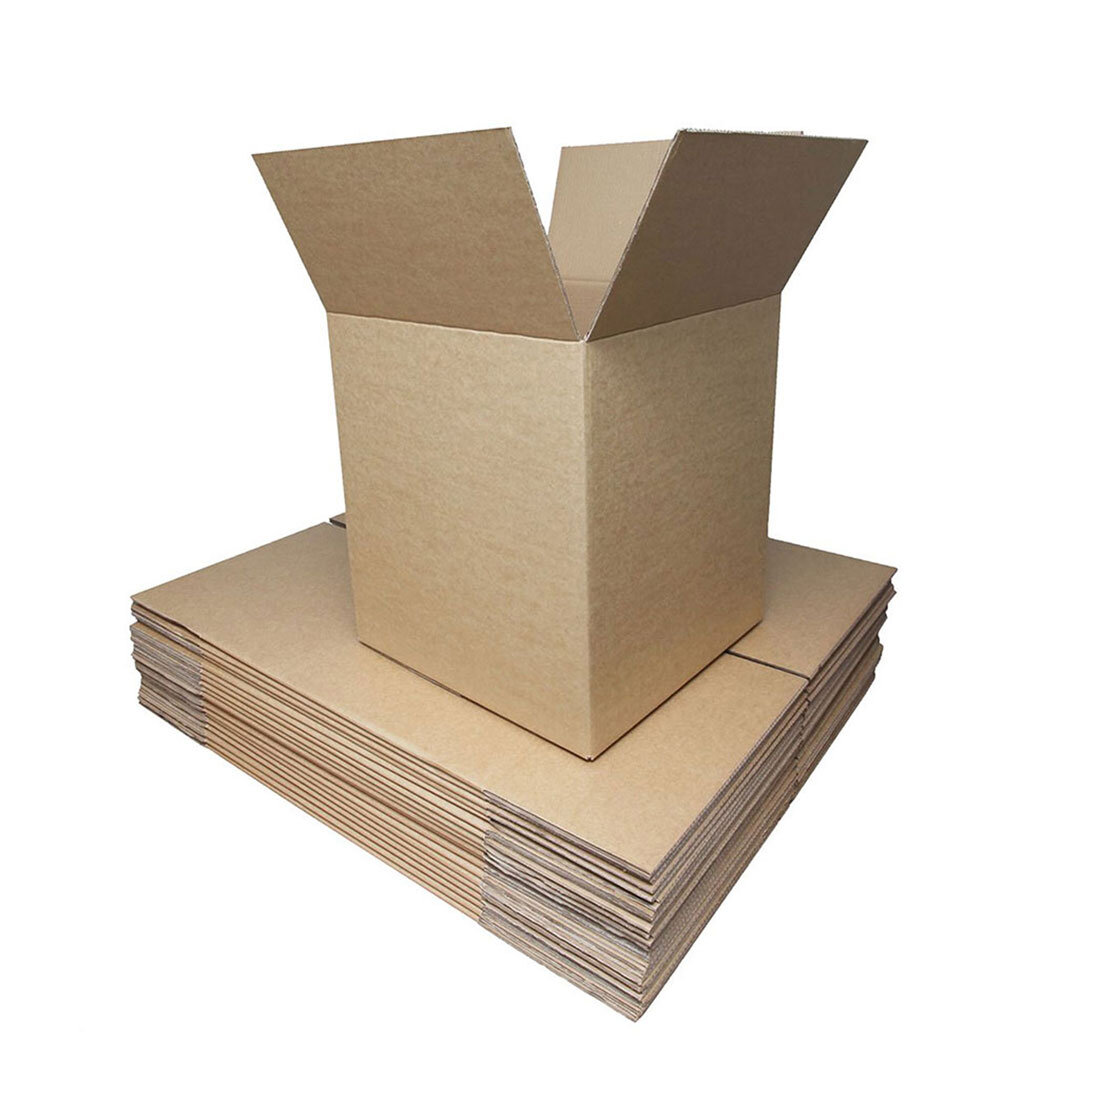 90 x DOUBLE WALL Stock Cartons Dispatch Boxes 18x18x20" 